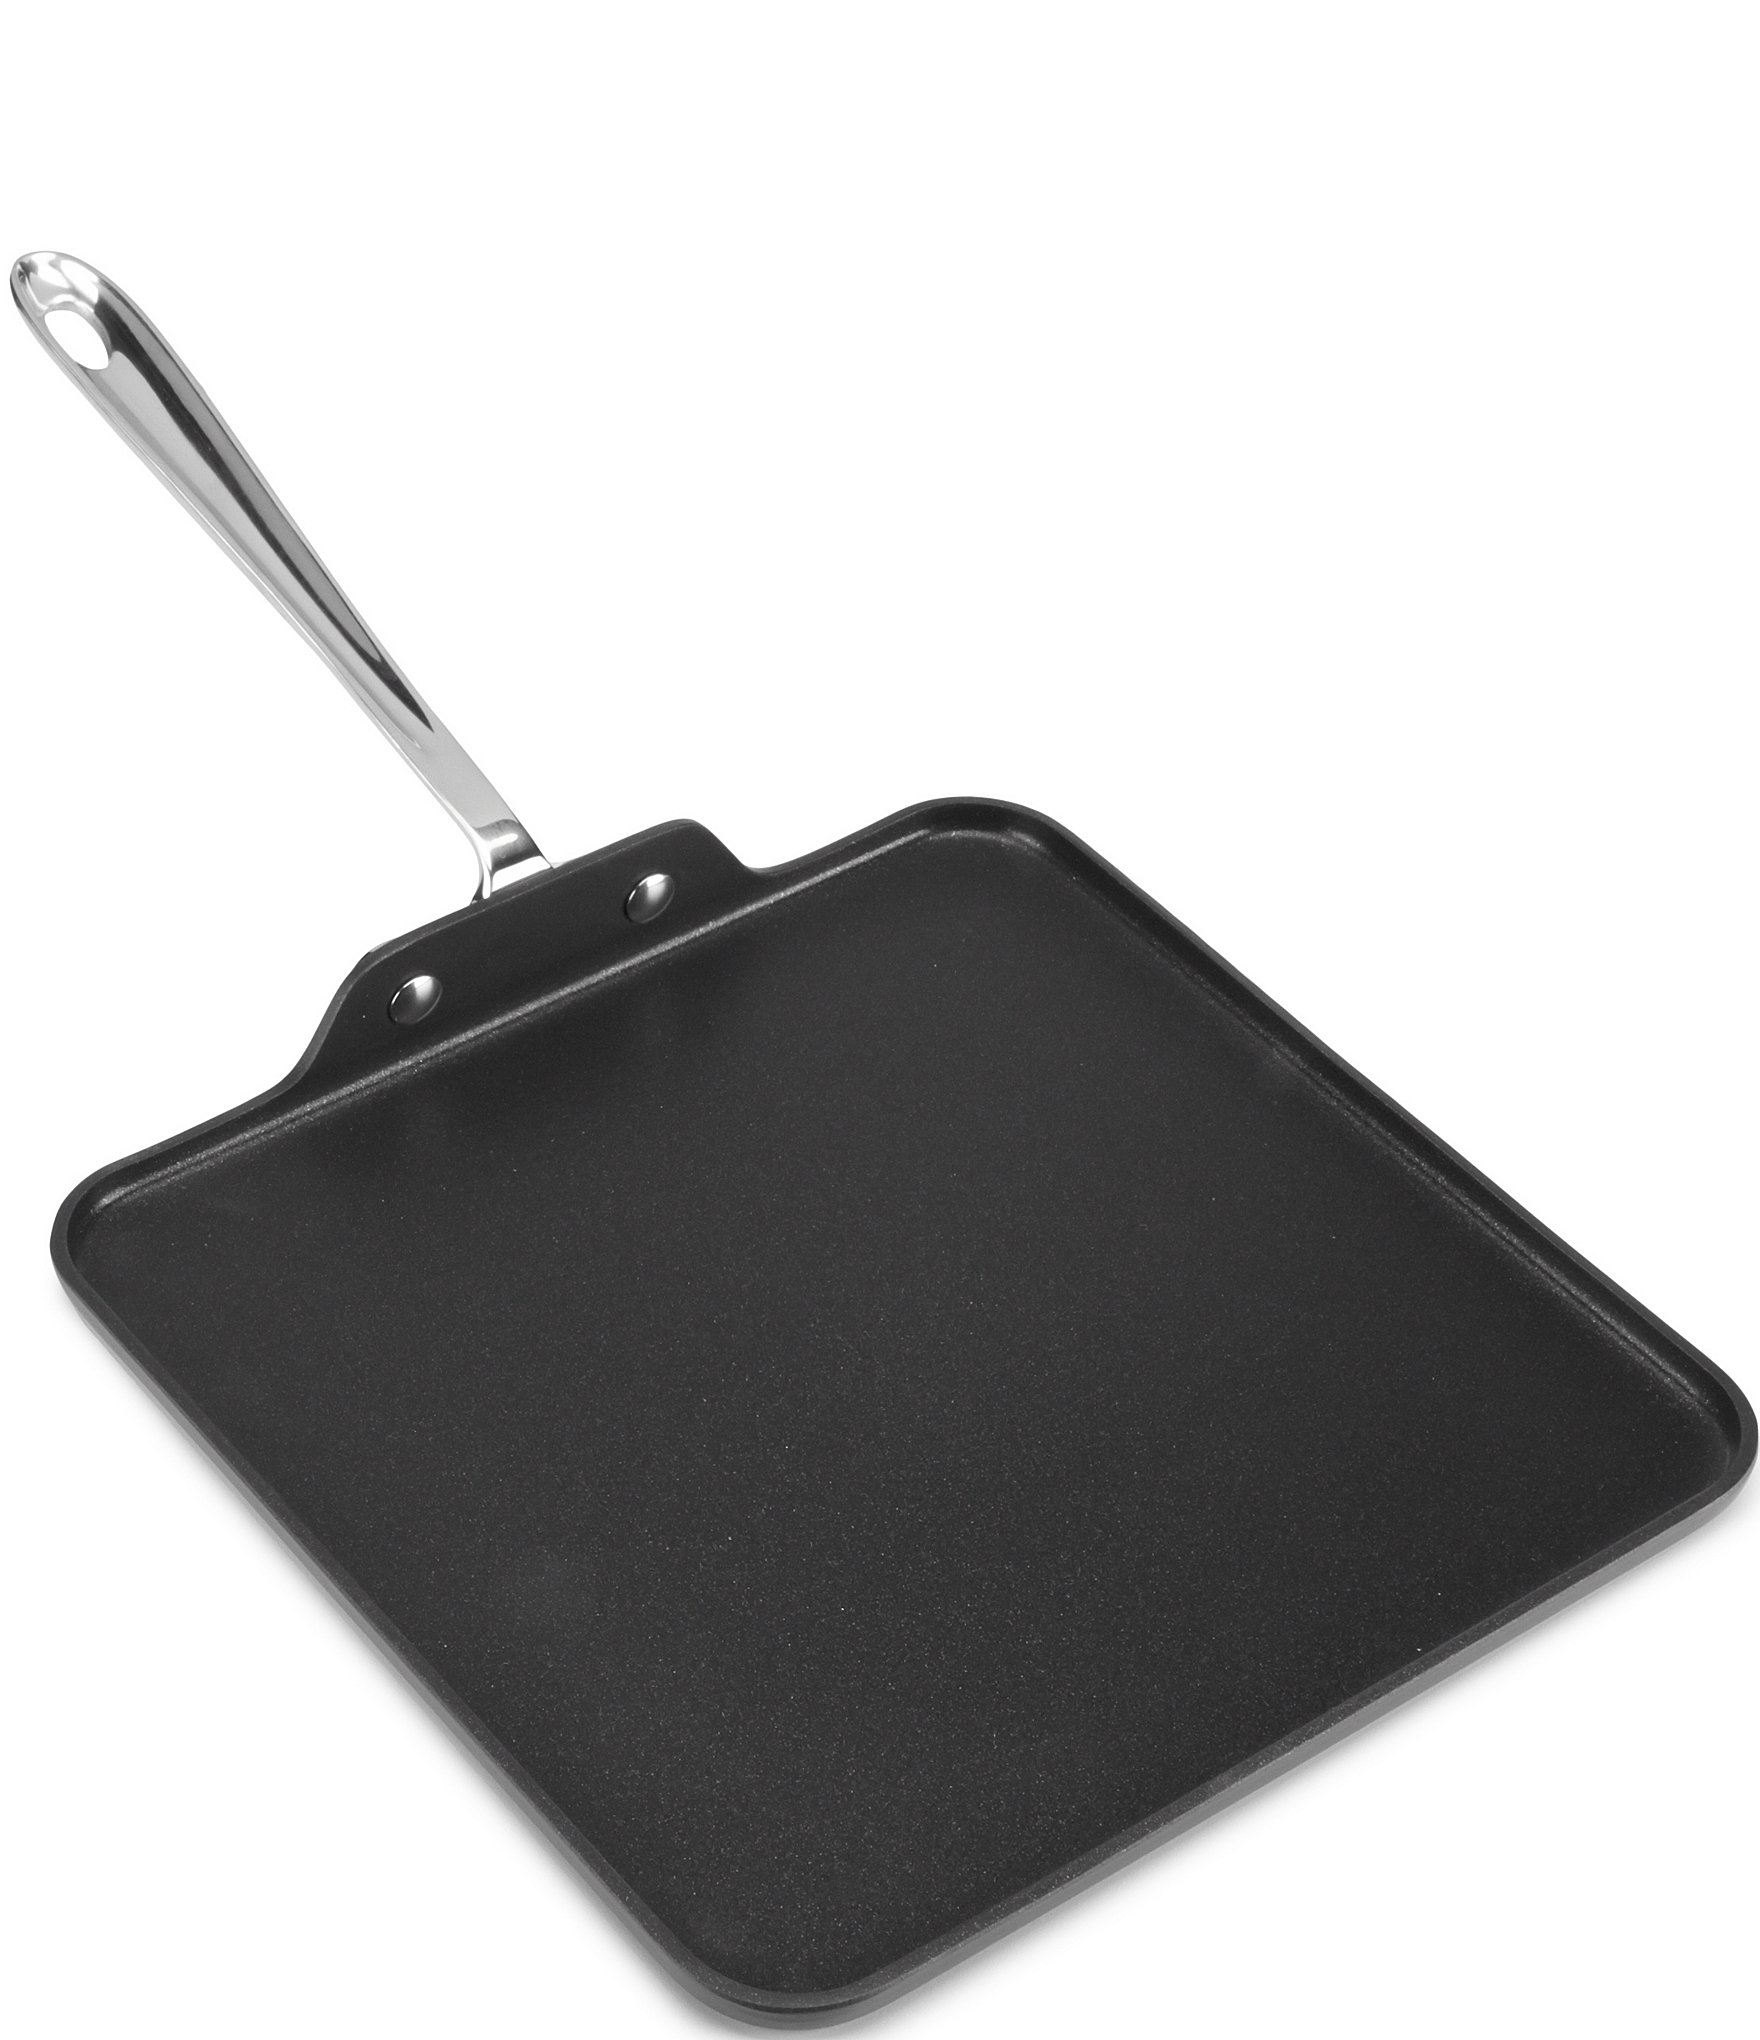 NEW All-Clad Essentials Nonstick Hard Anodized Square Pan 13 Black H911S264